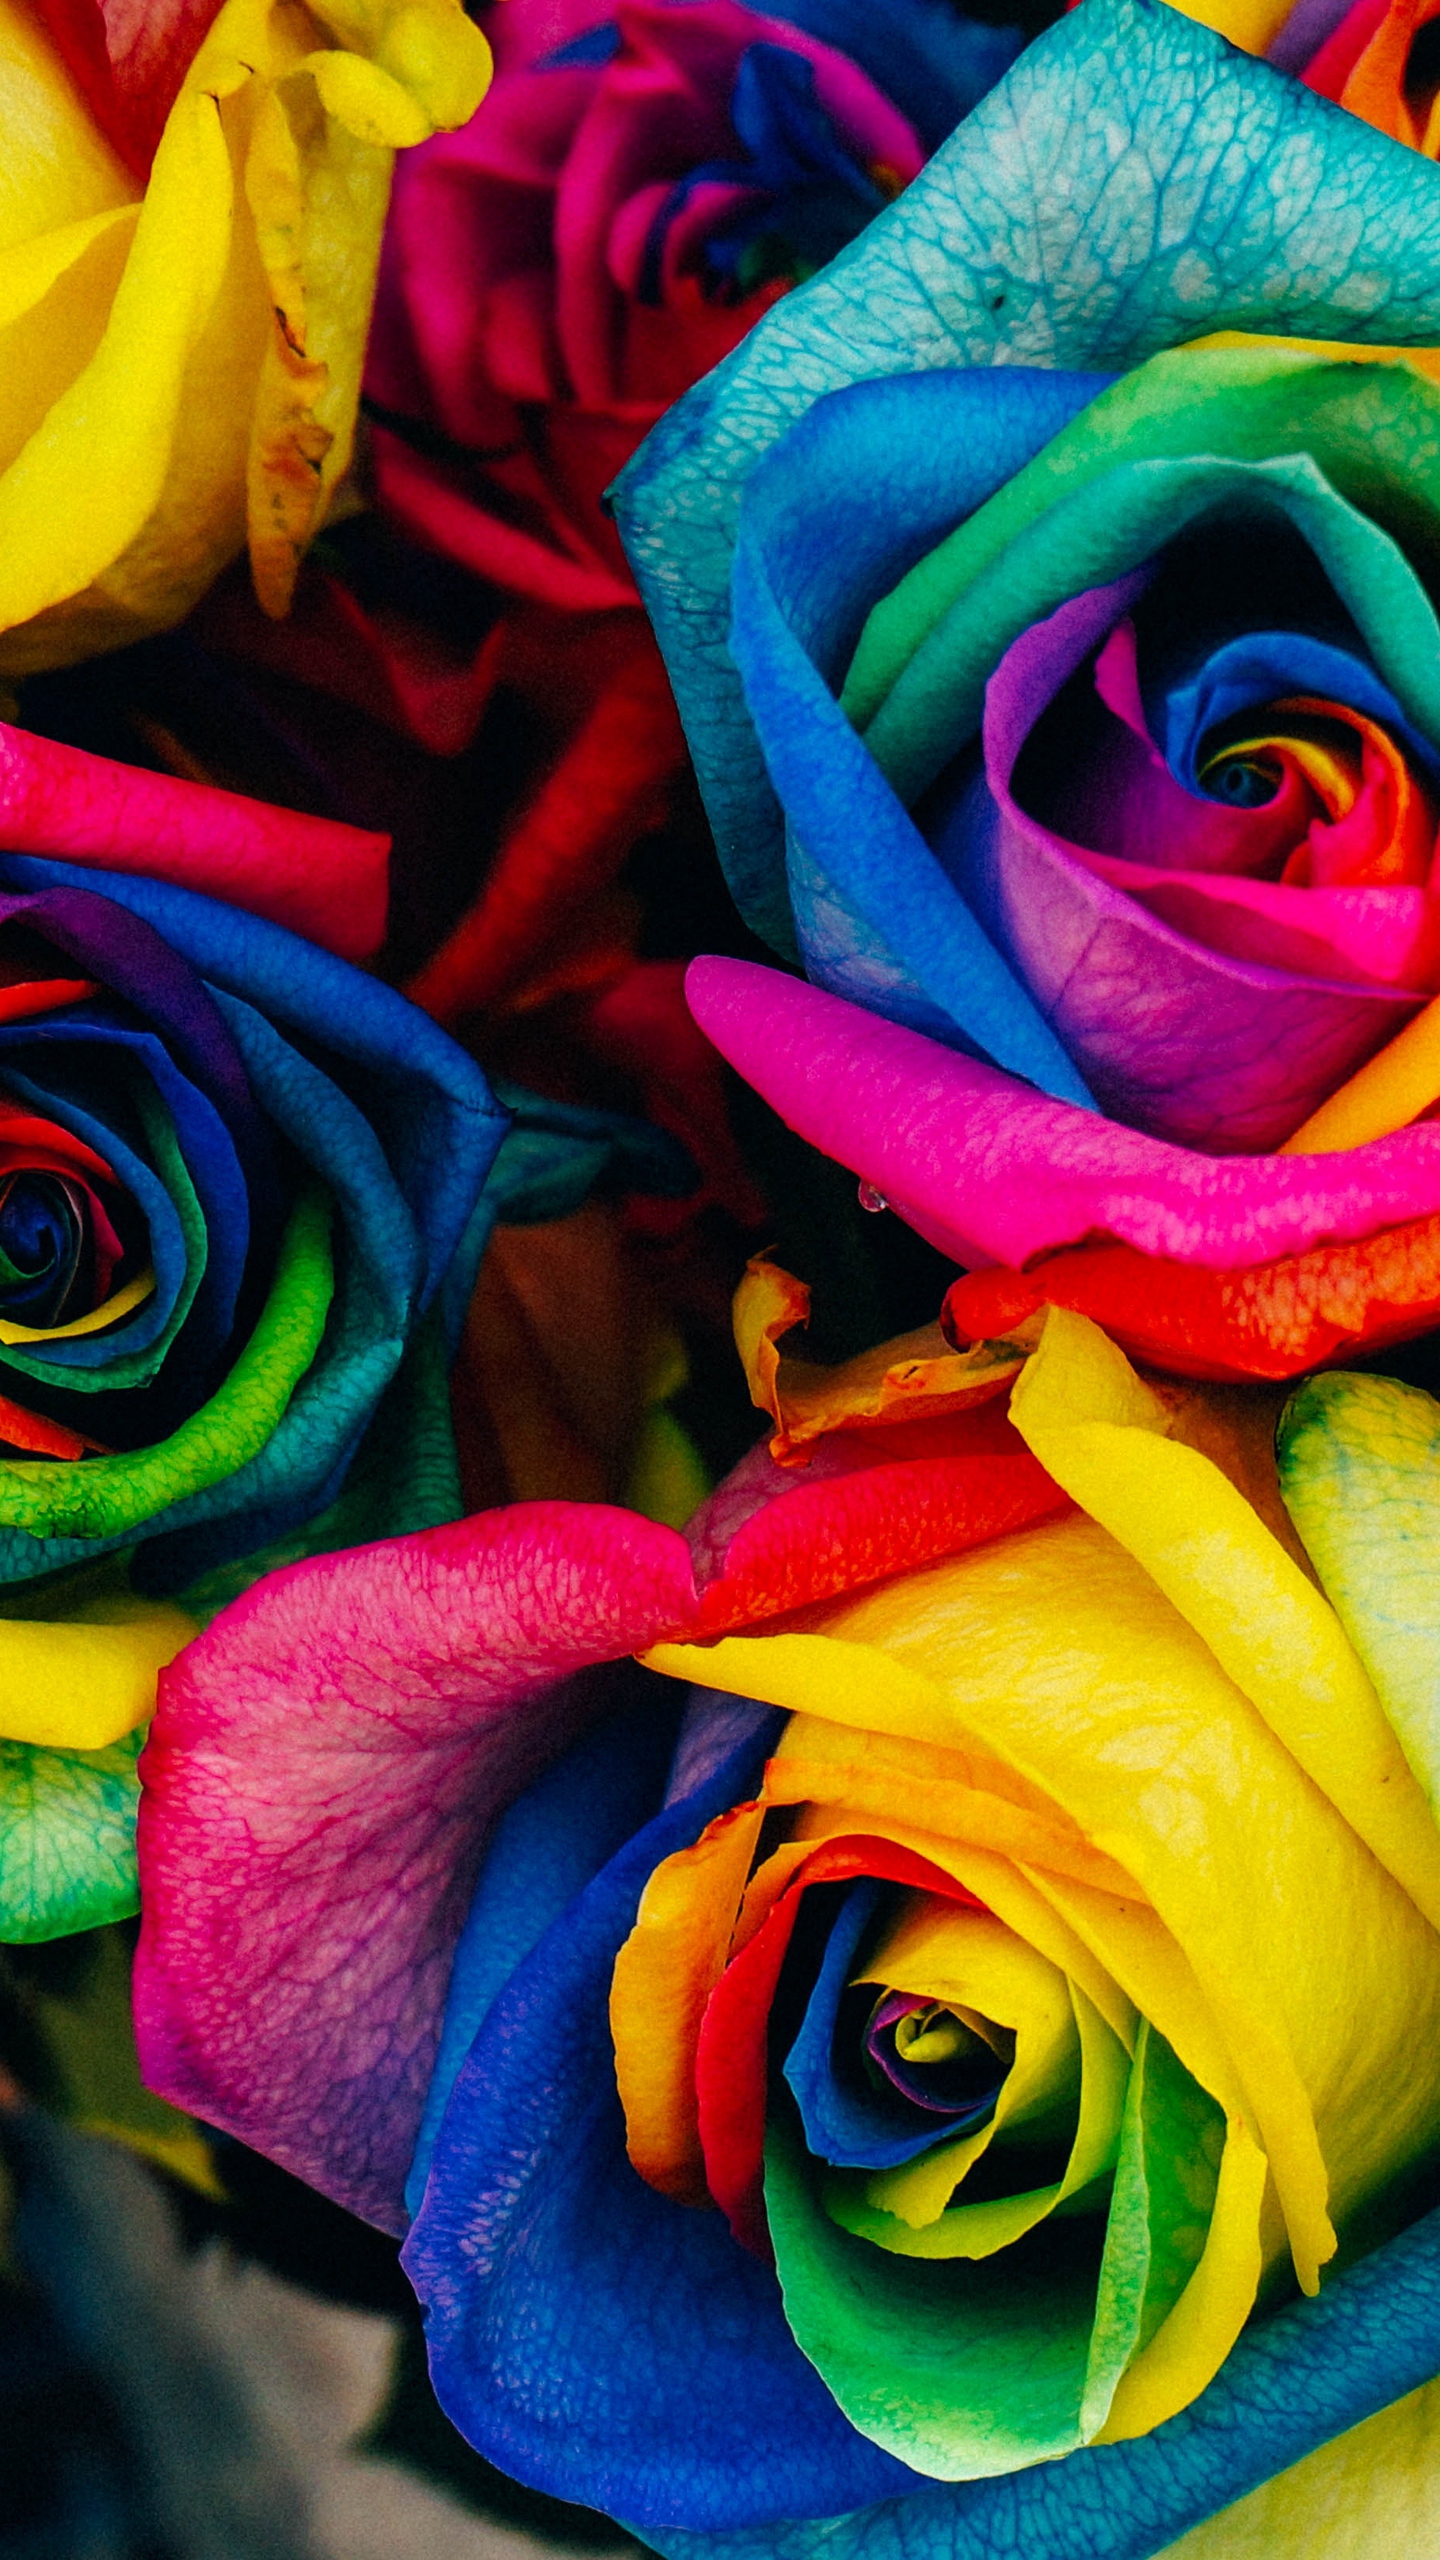 Wallpaper Roses, Colorful, Rainbow - Rainbow Background For Iphone - HD Wallpaper 